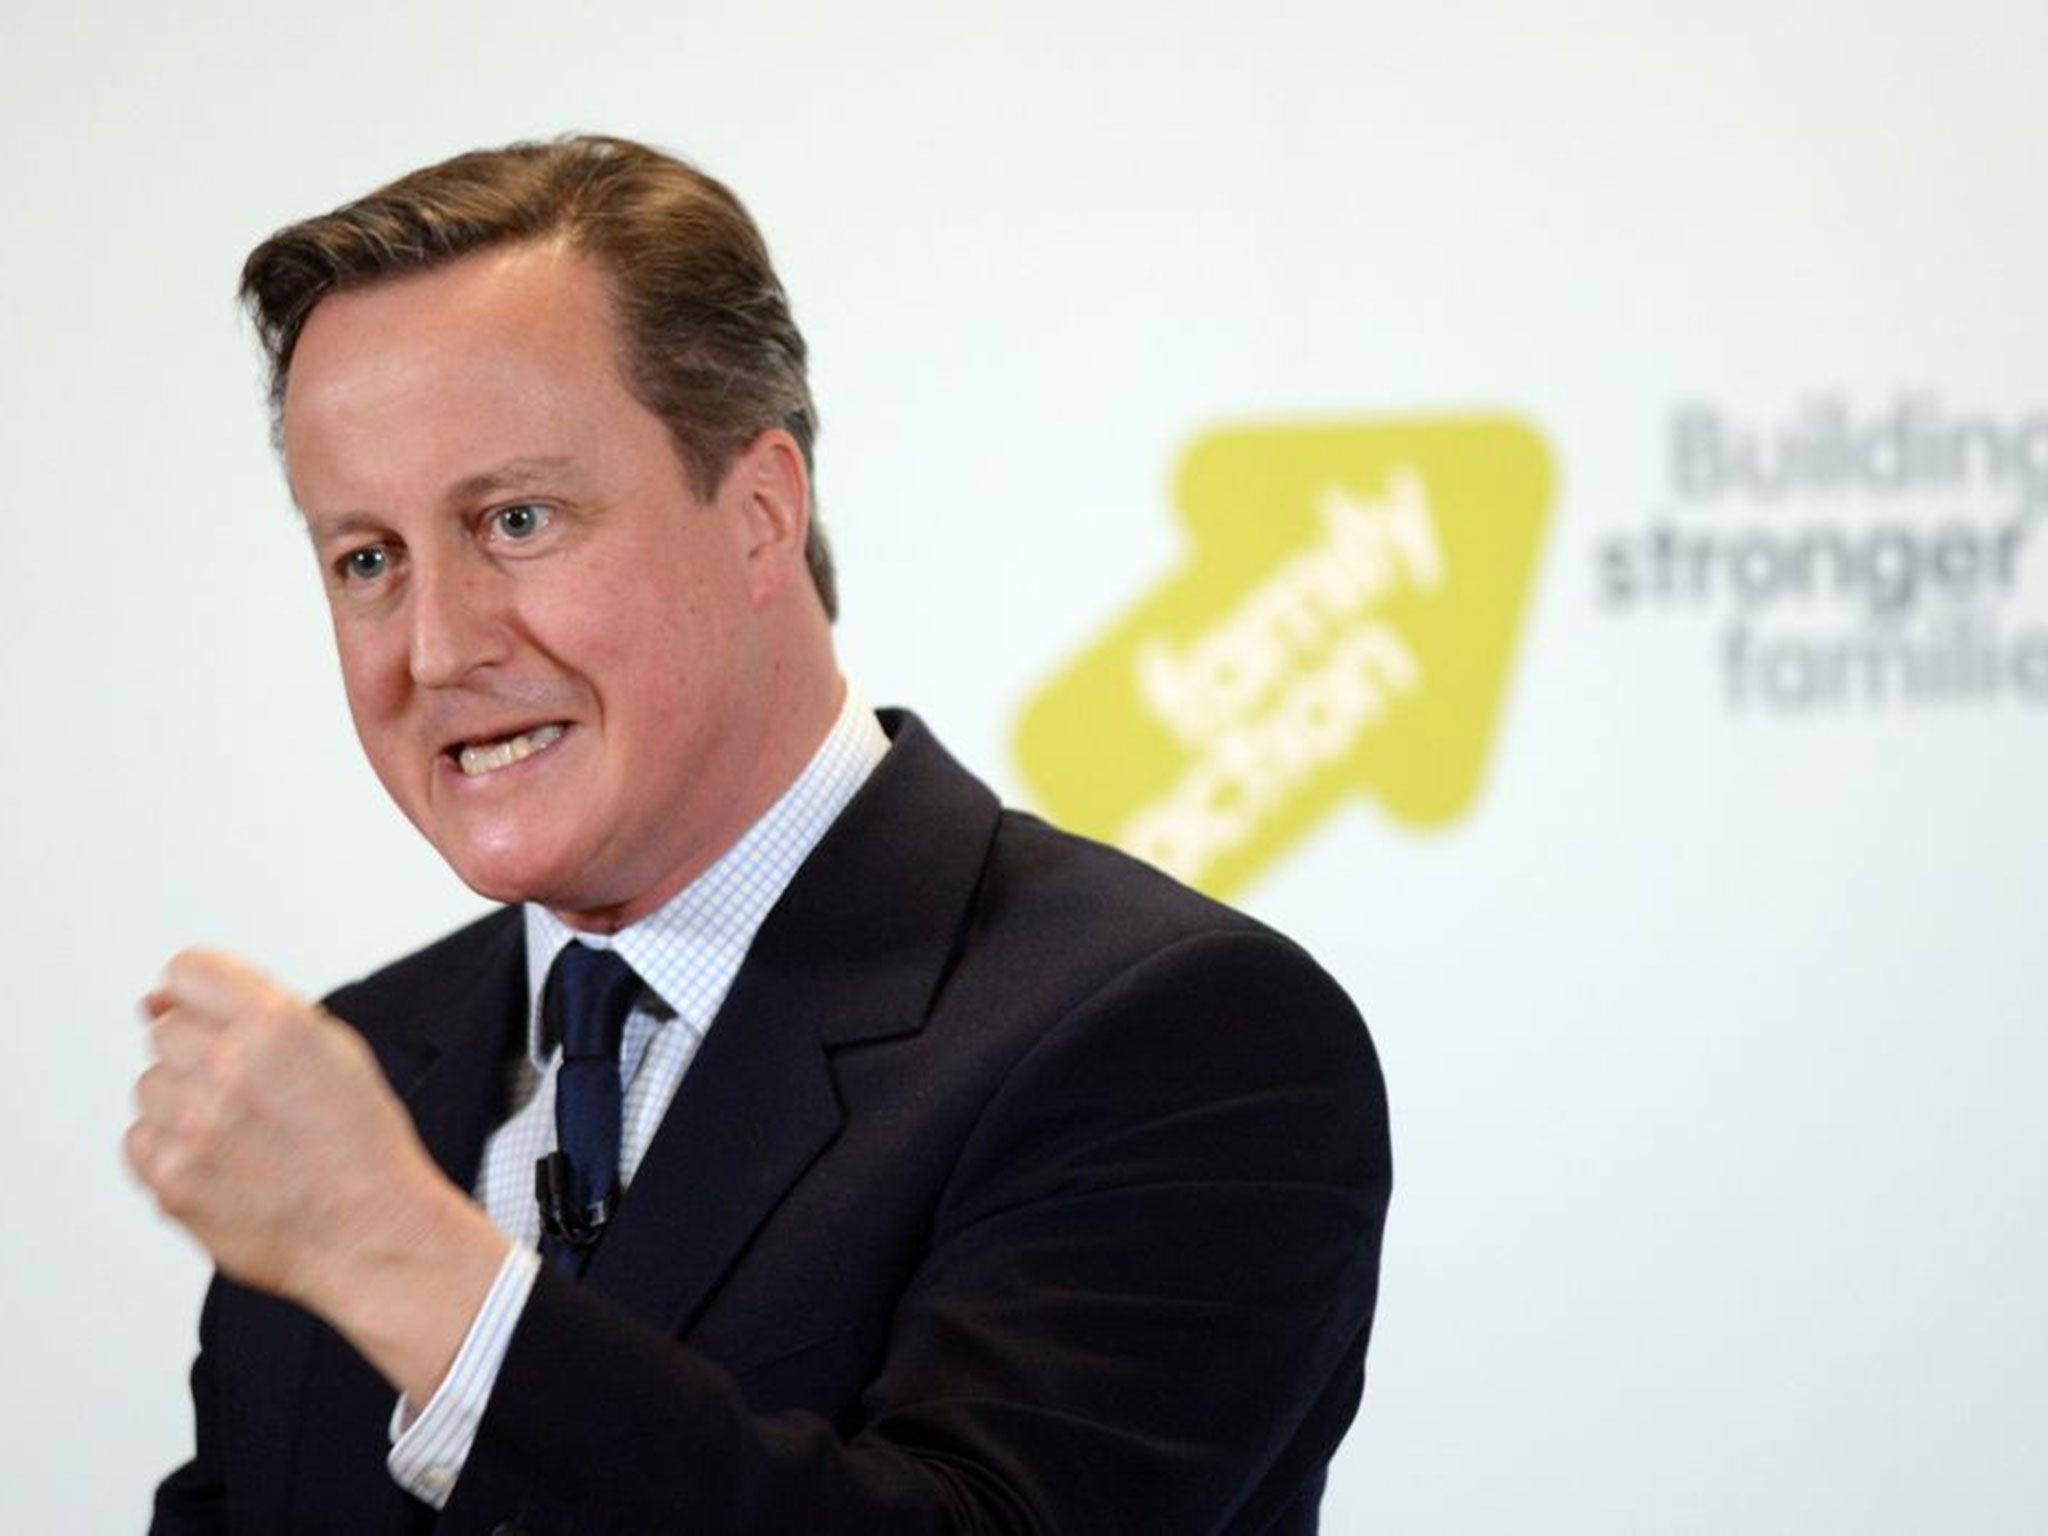 Cameron is the first sitting prime minister to make a speech about mental health